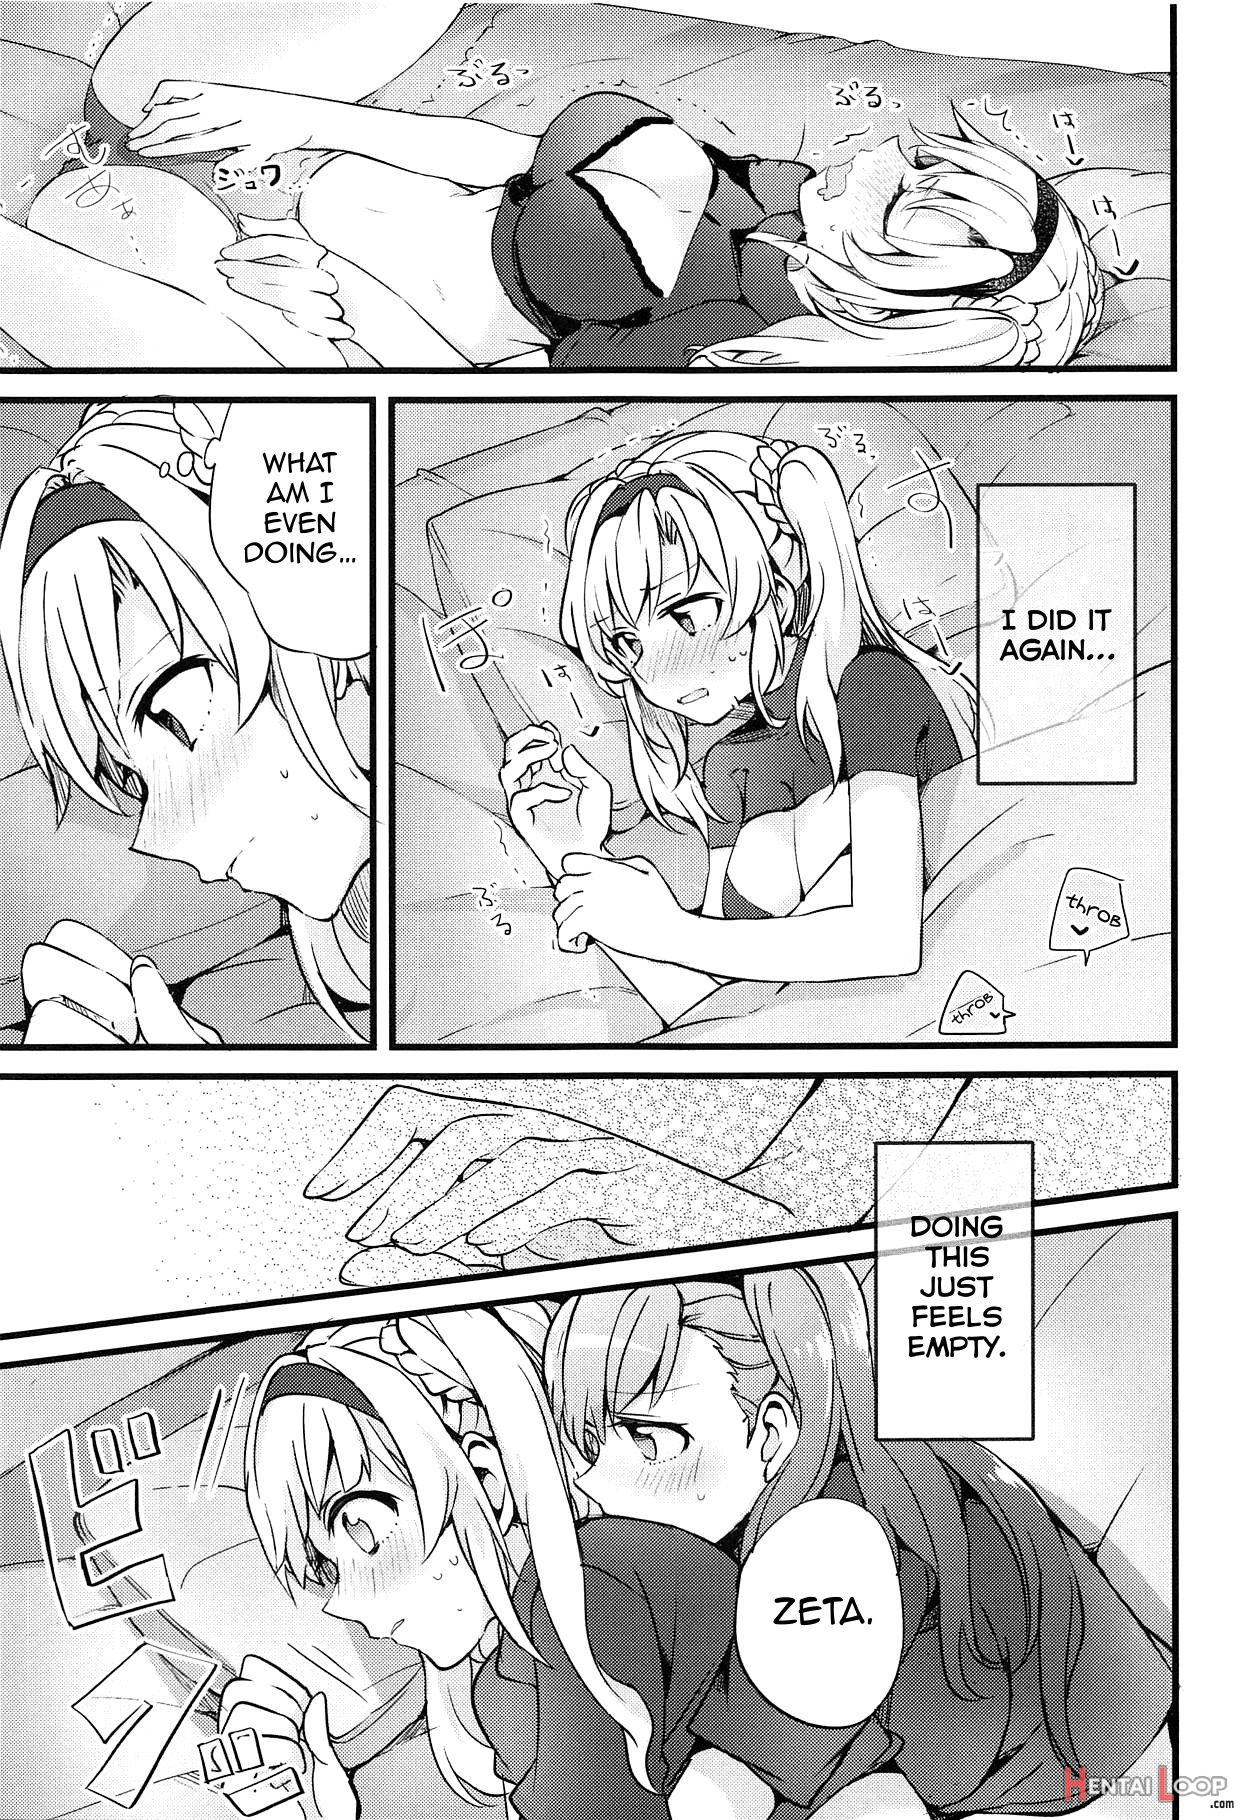 I Want To Have Sex With My Favorite Girl Erokawa_senpai] page 10